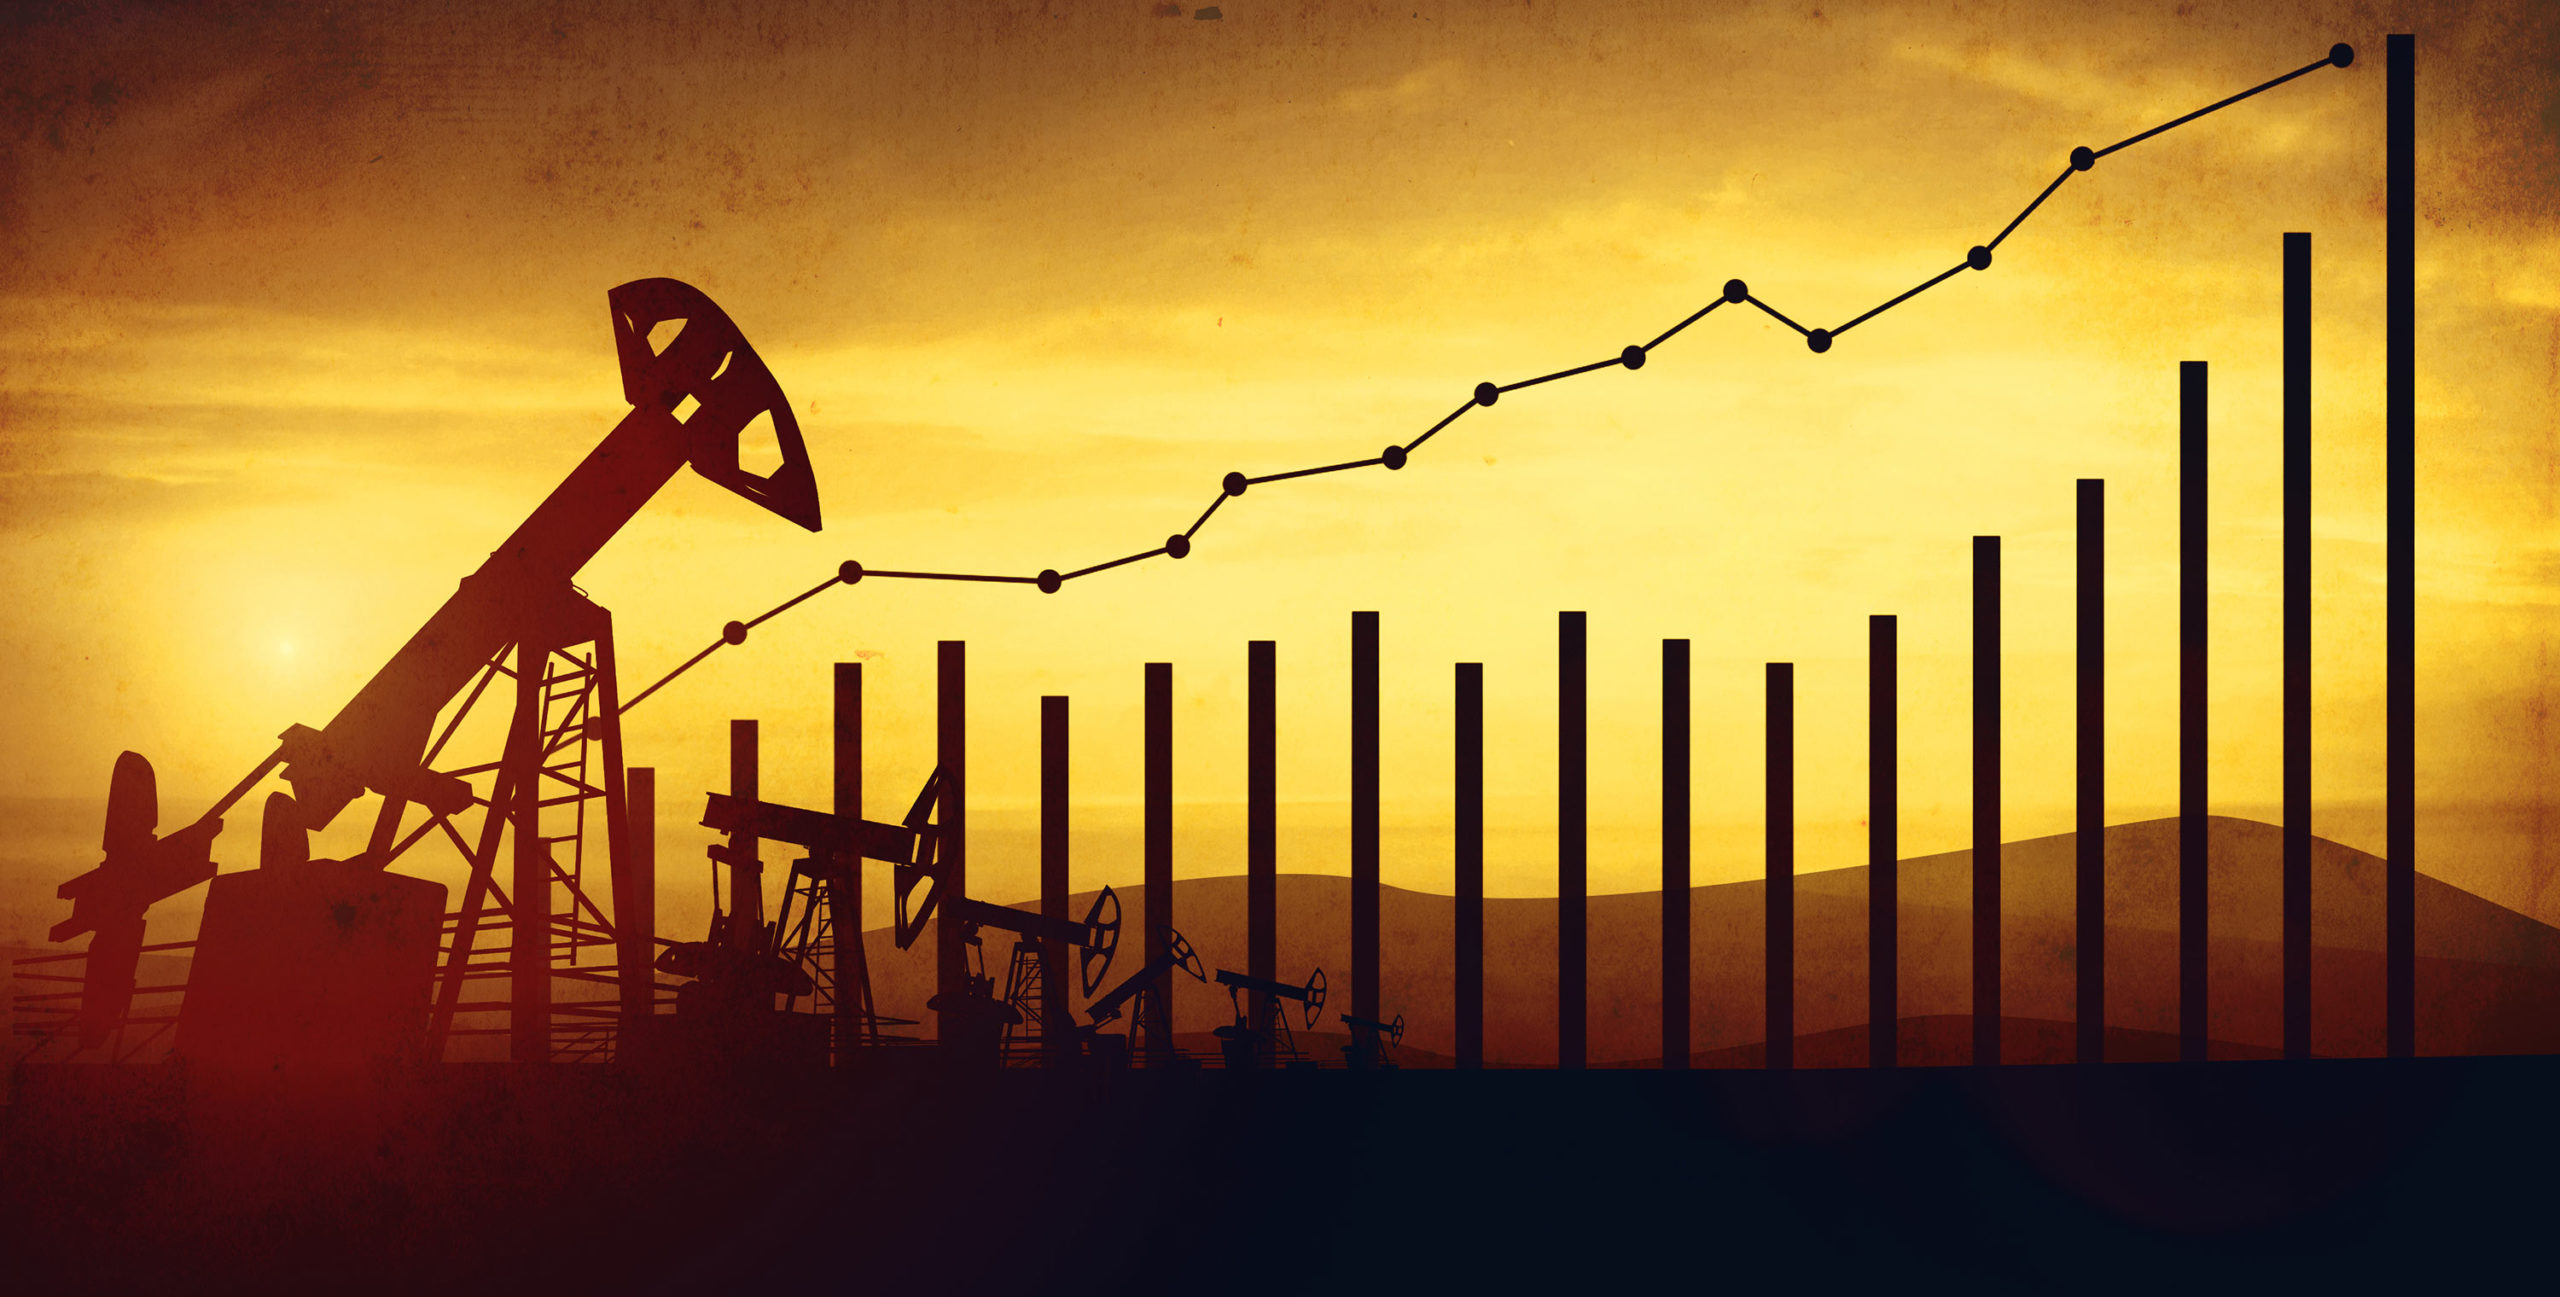 What to watch out for in 2019 in E&P